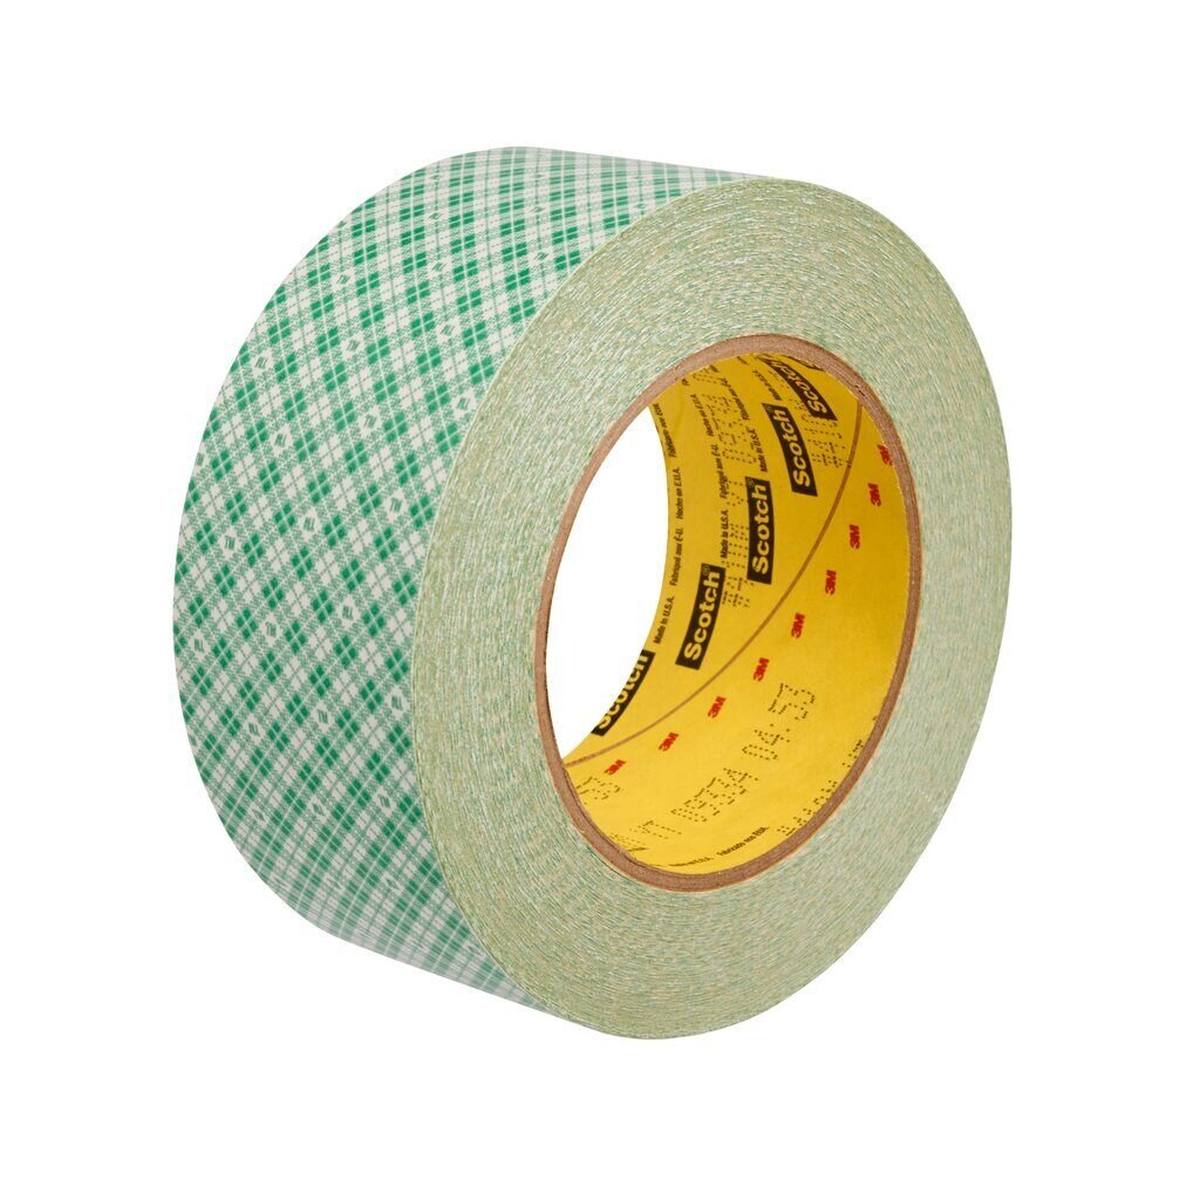 3M Double-sided adhesive tape with non-woven paper backing 410M, white, 50 mm x 33 m, 0.13 mm